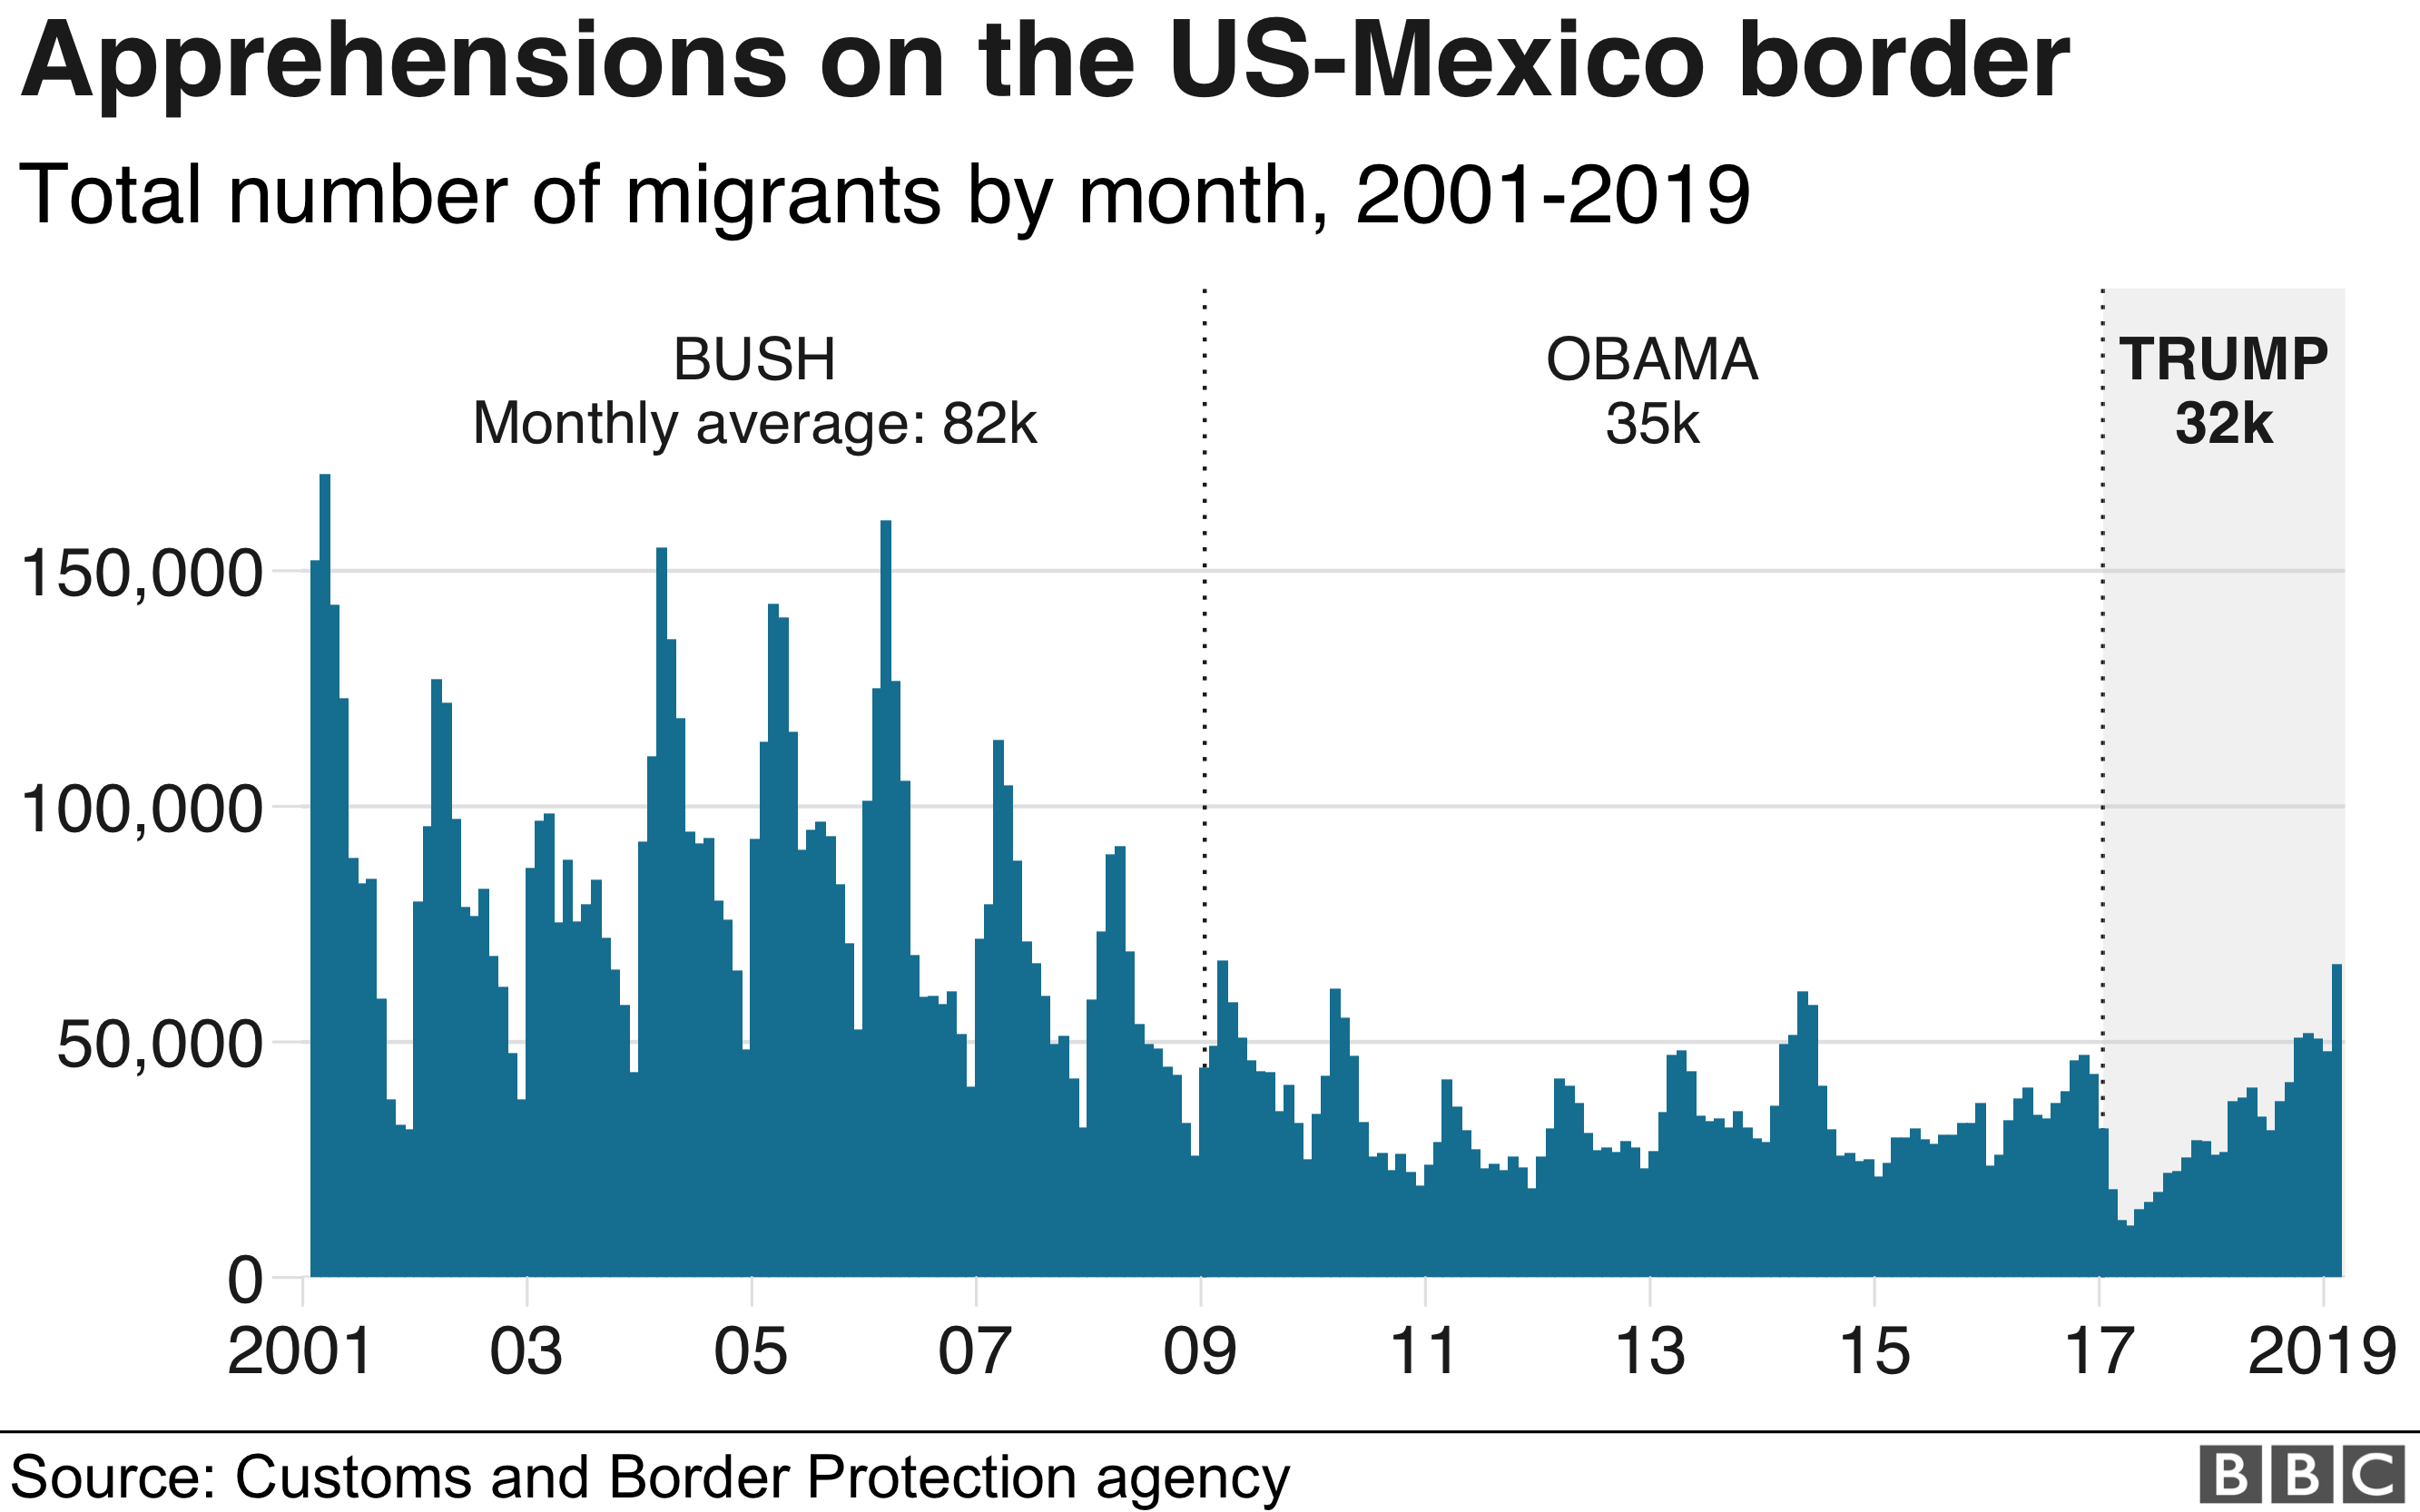 Chart showing the number of apprehensions at the US-Mexico border by US president